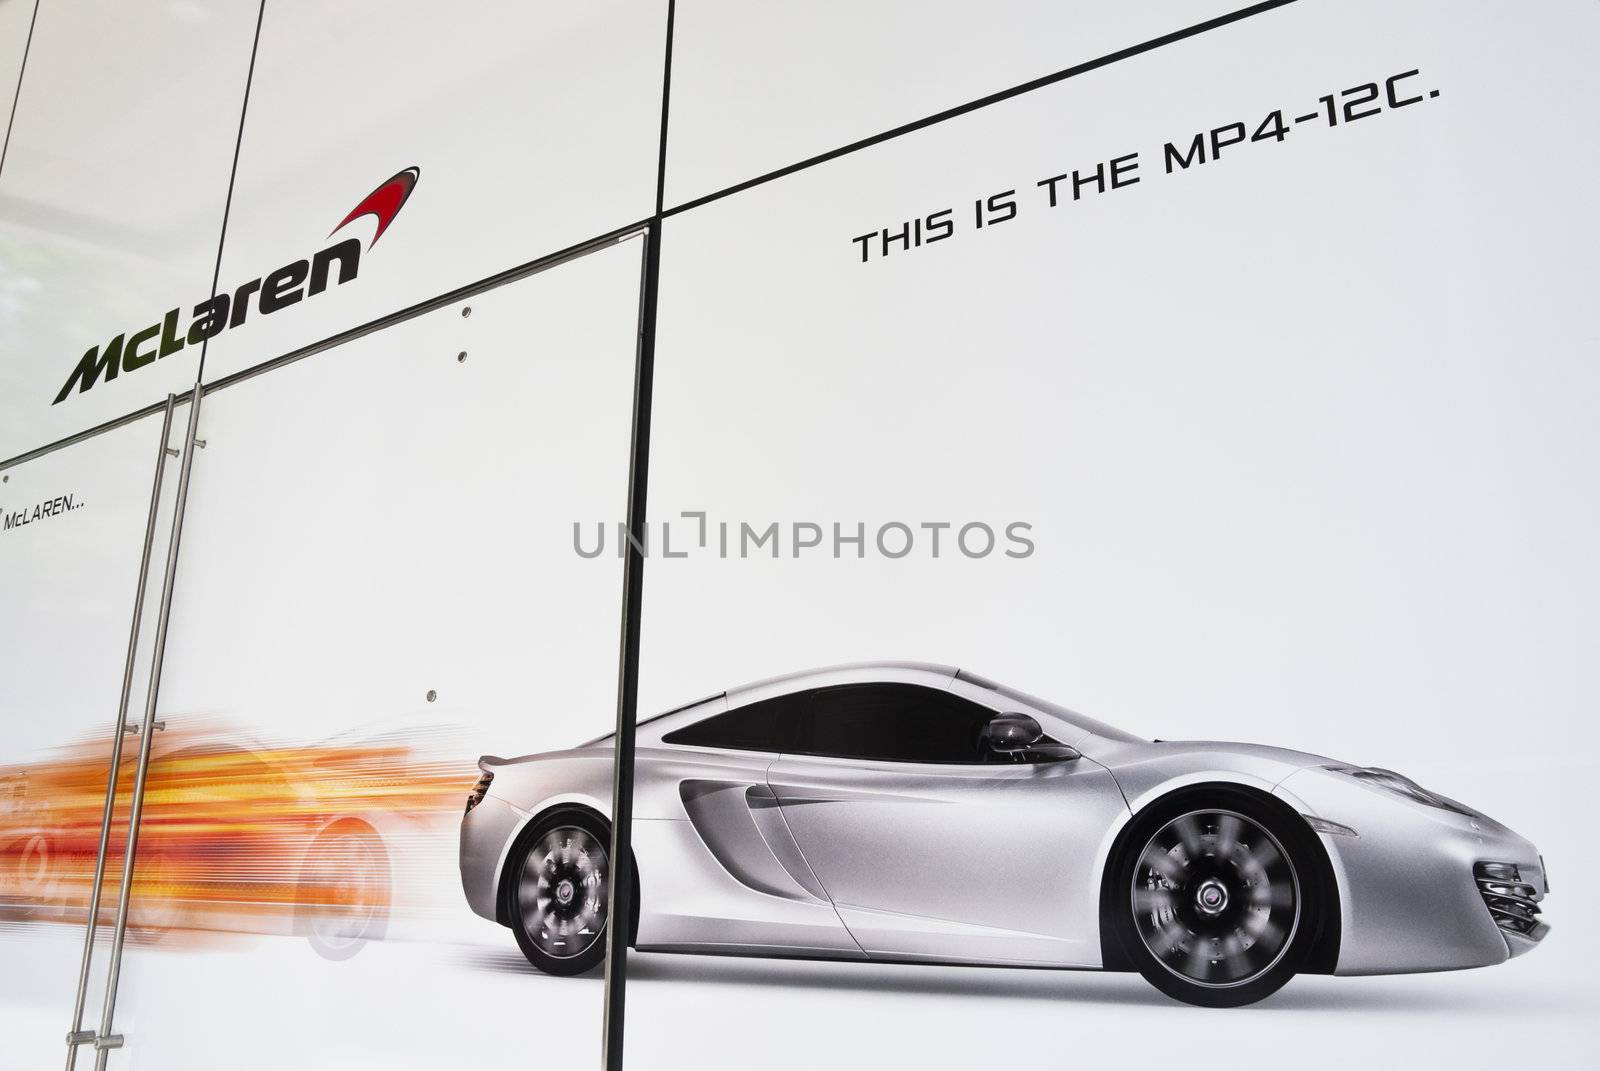 LONDON, UK - MAY 24: The McLaren showroom for the new MP4-12C due to open this summer, May 24, 2011 in London, United Kingdom by dutourdumonde